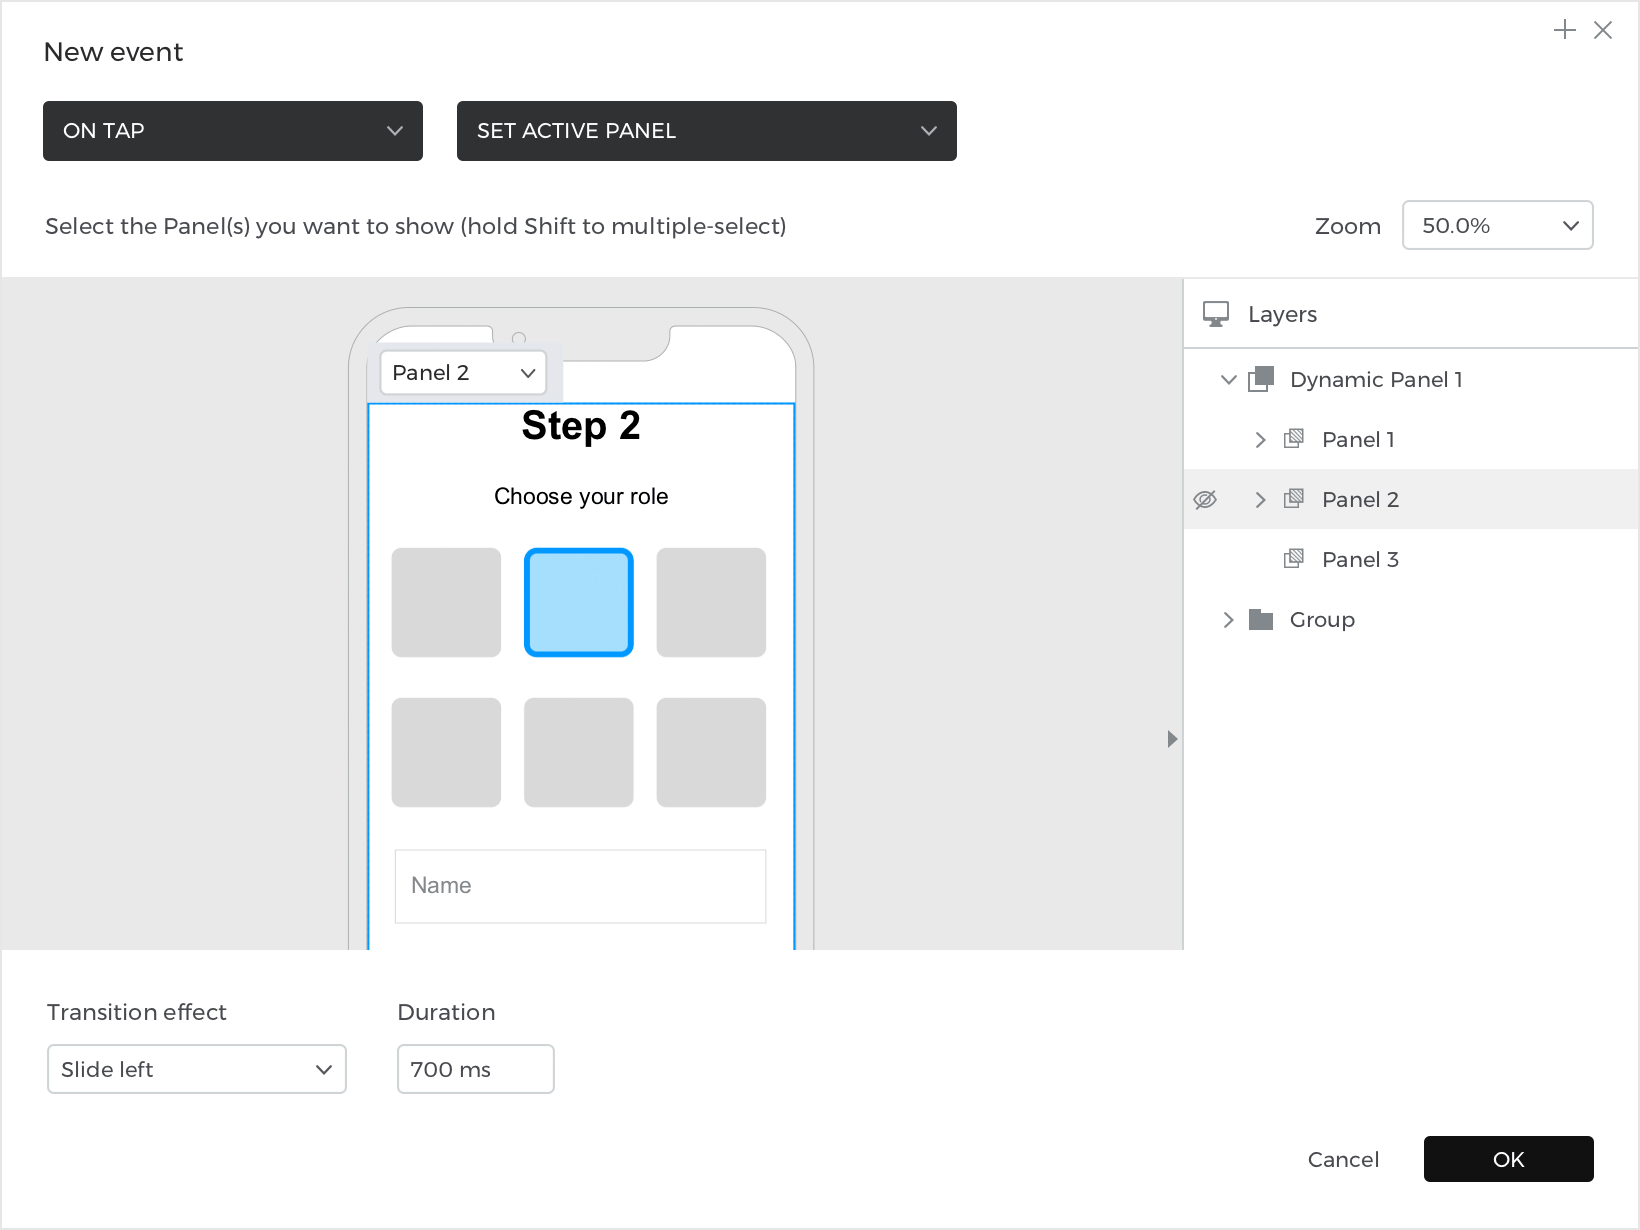 Choose the set active panel action and choose a panel to set as active